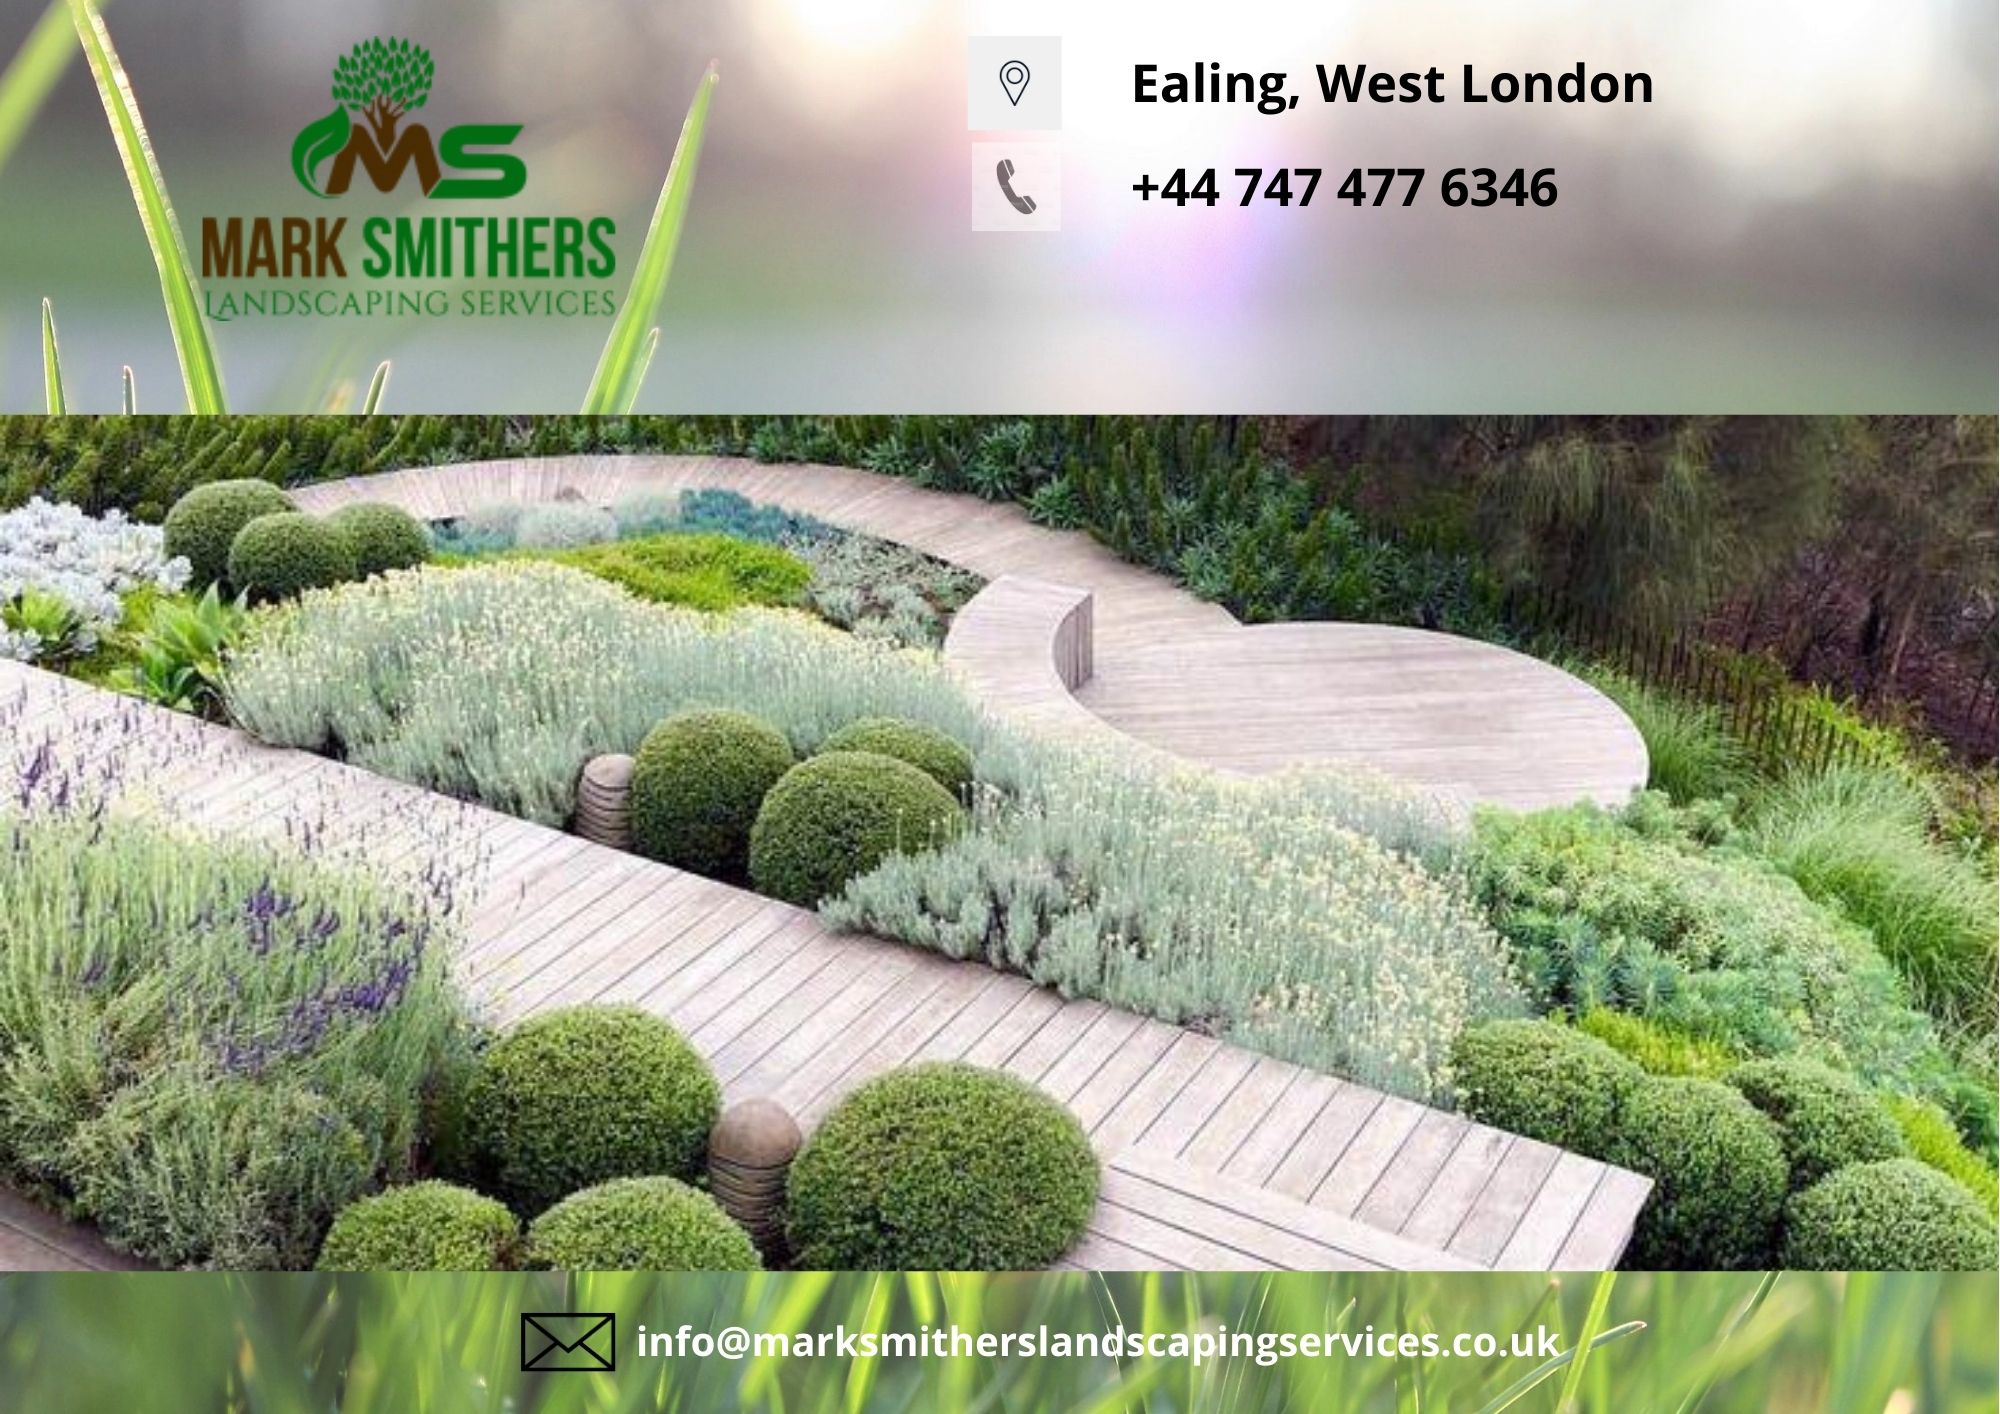 Mark Smithers Landscaping Services